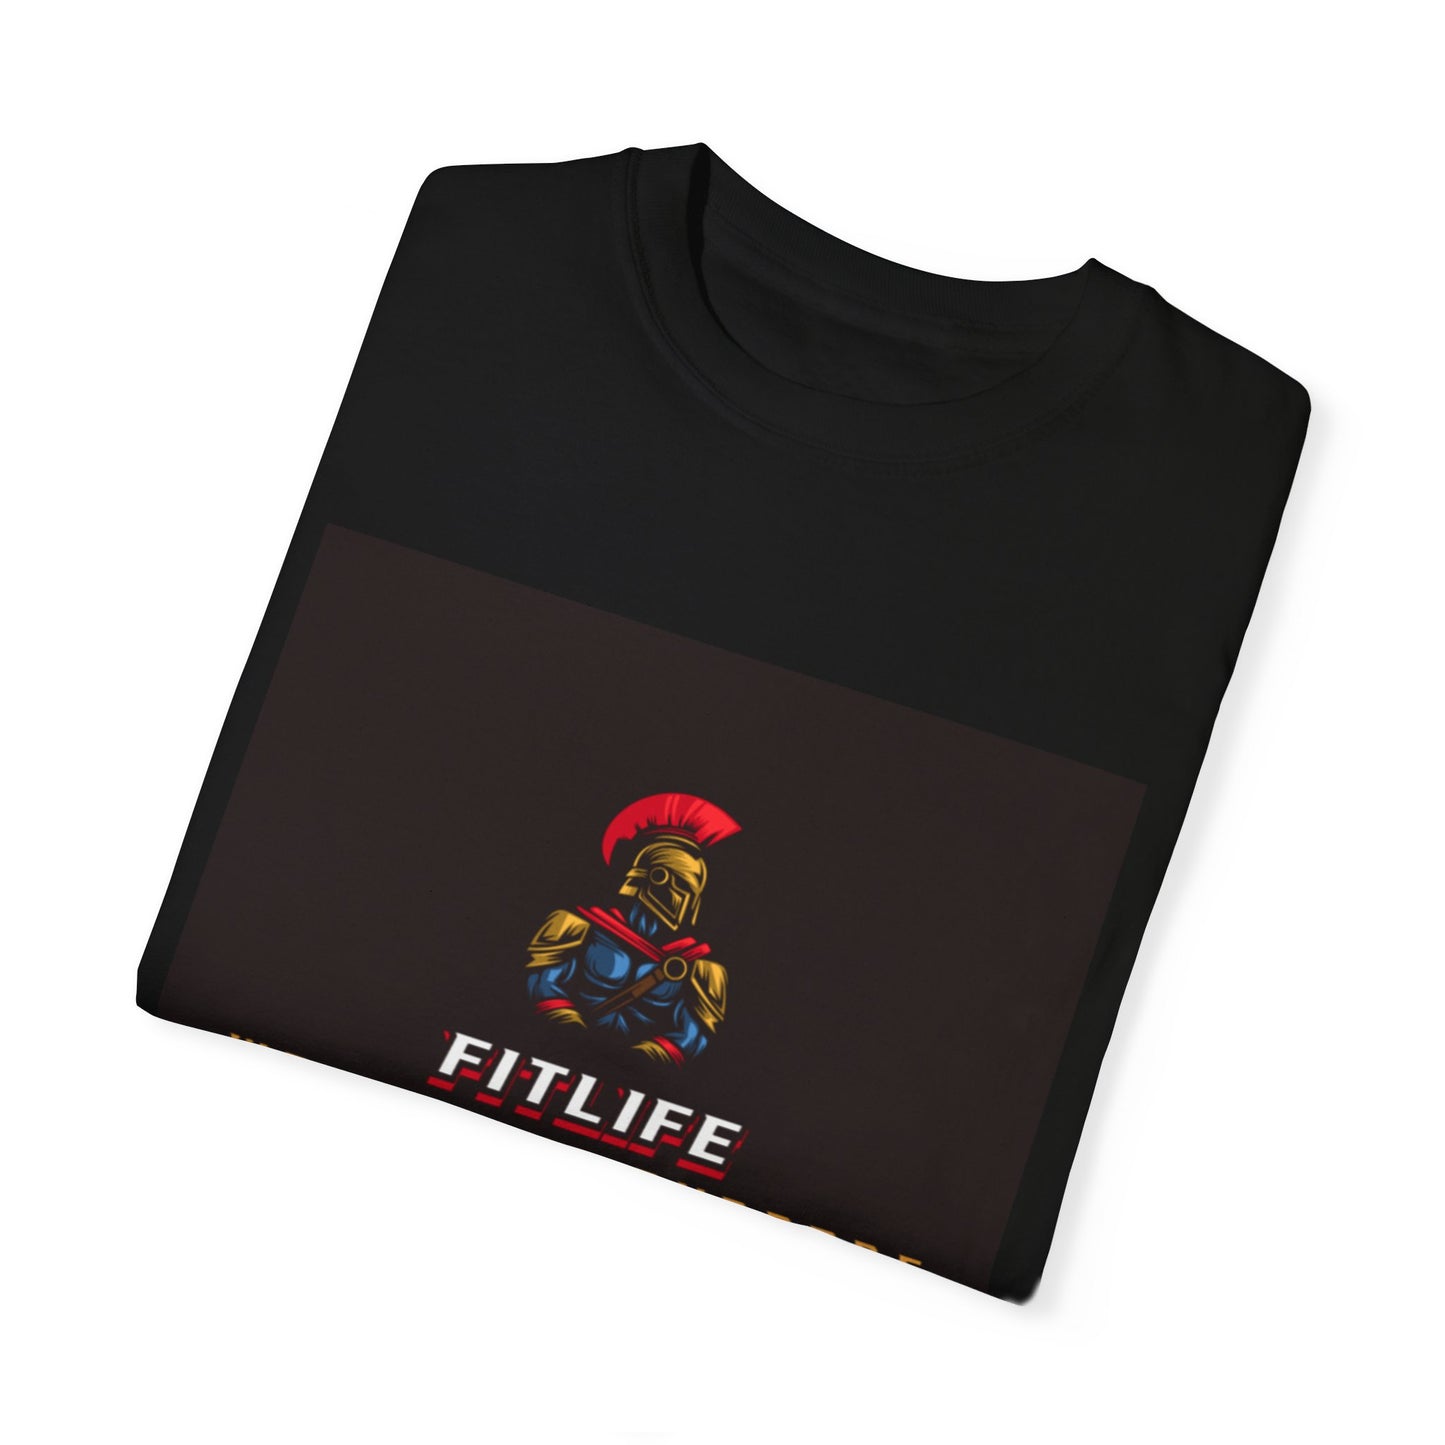 Fitlife gladiator t-shirt